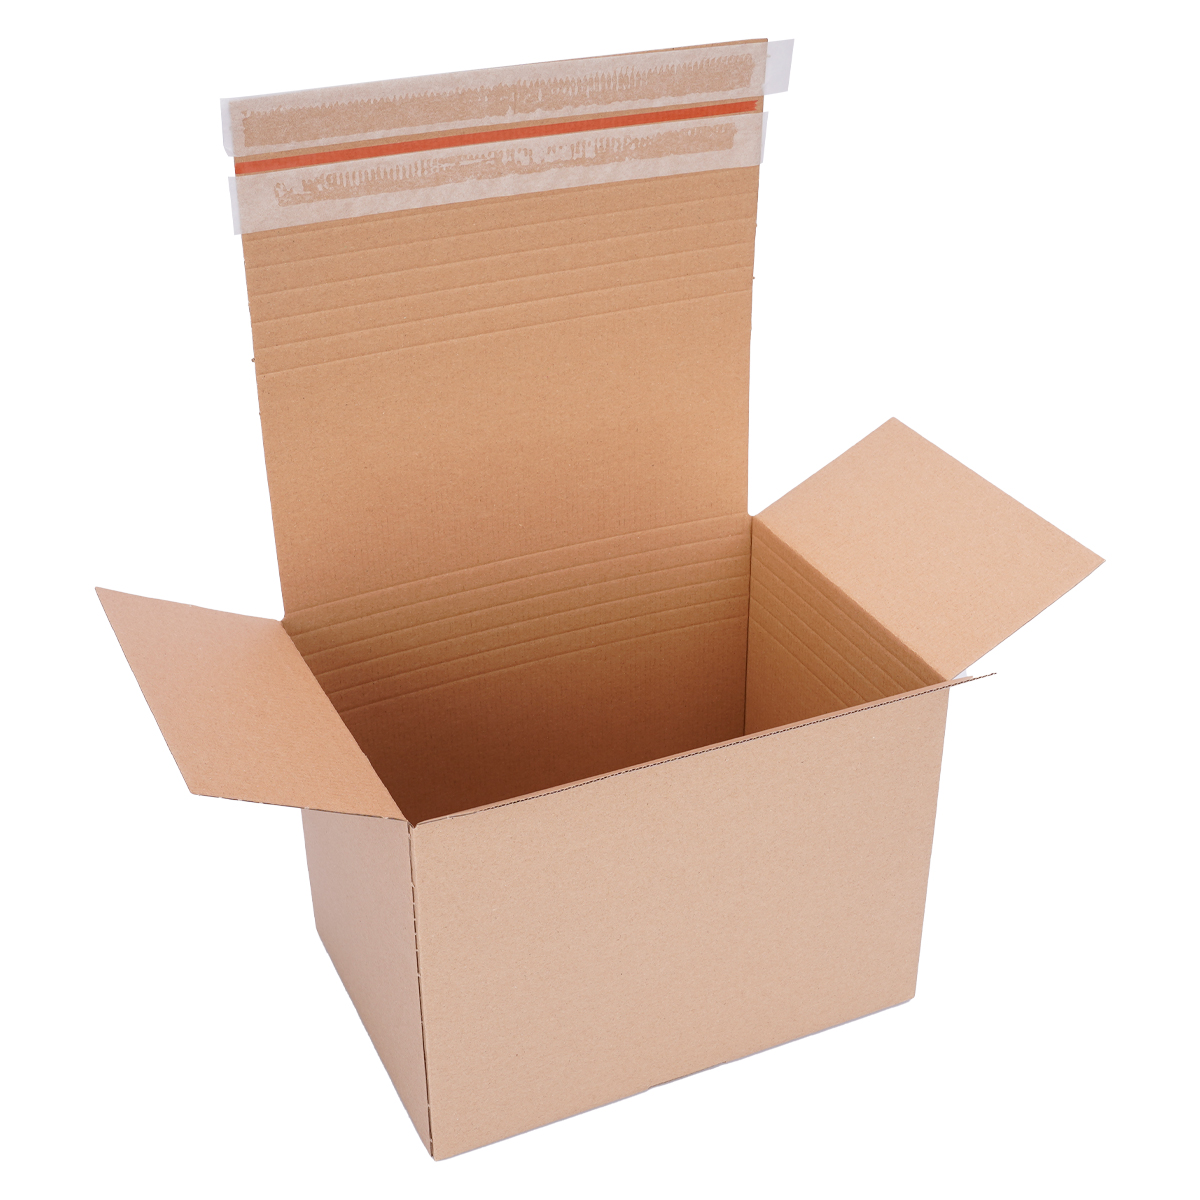 Automatic cardboard box A4 304x216x130-220 mm with self-adhesive lid - VP50
